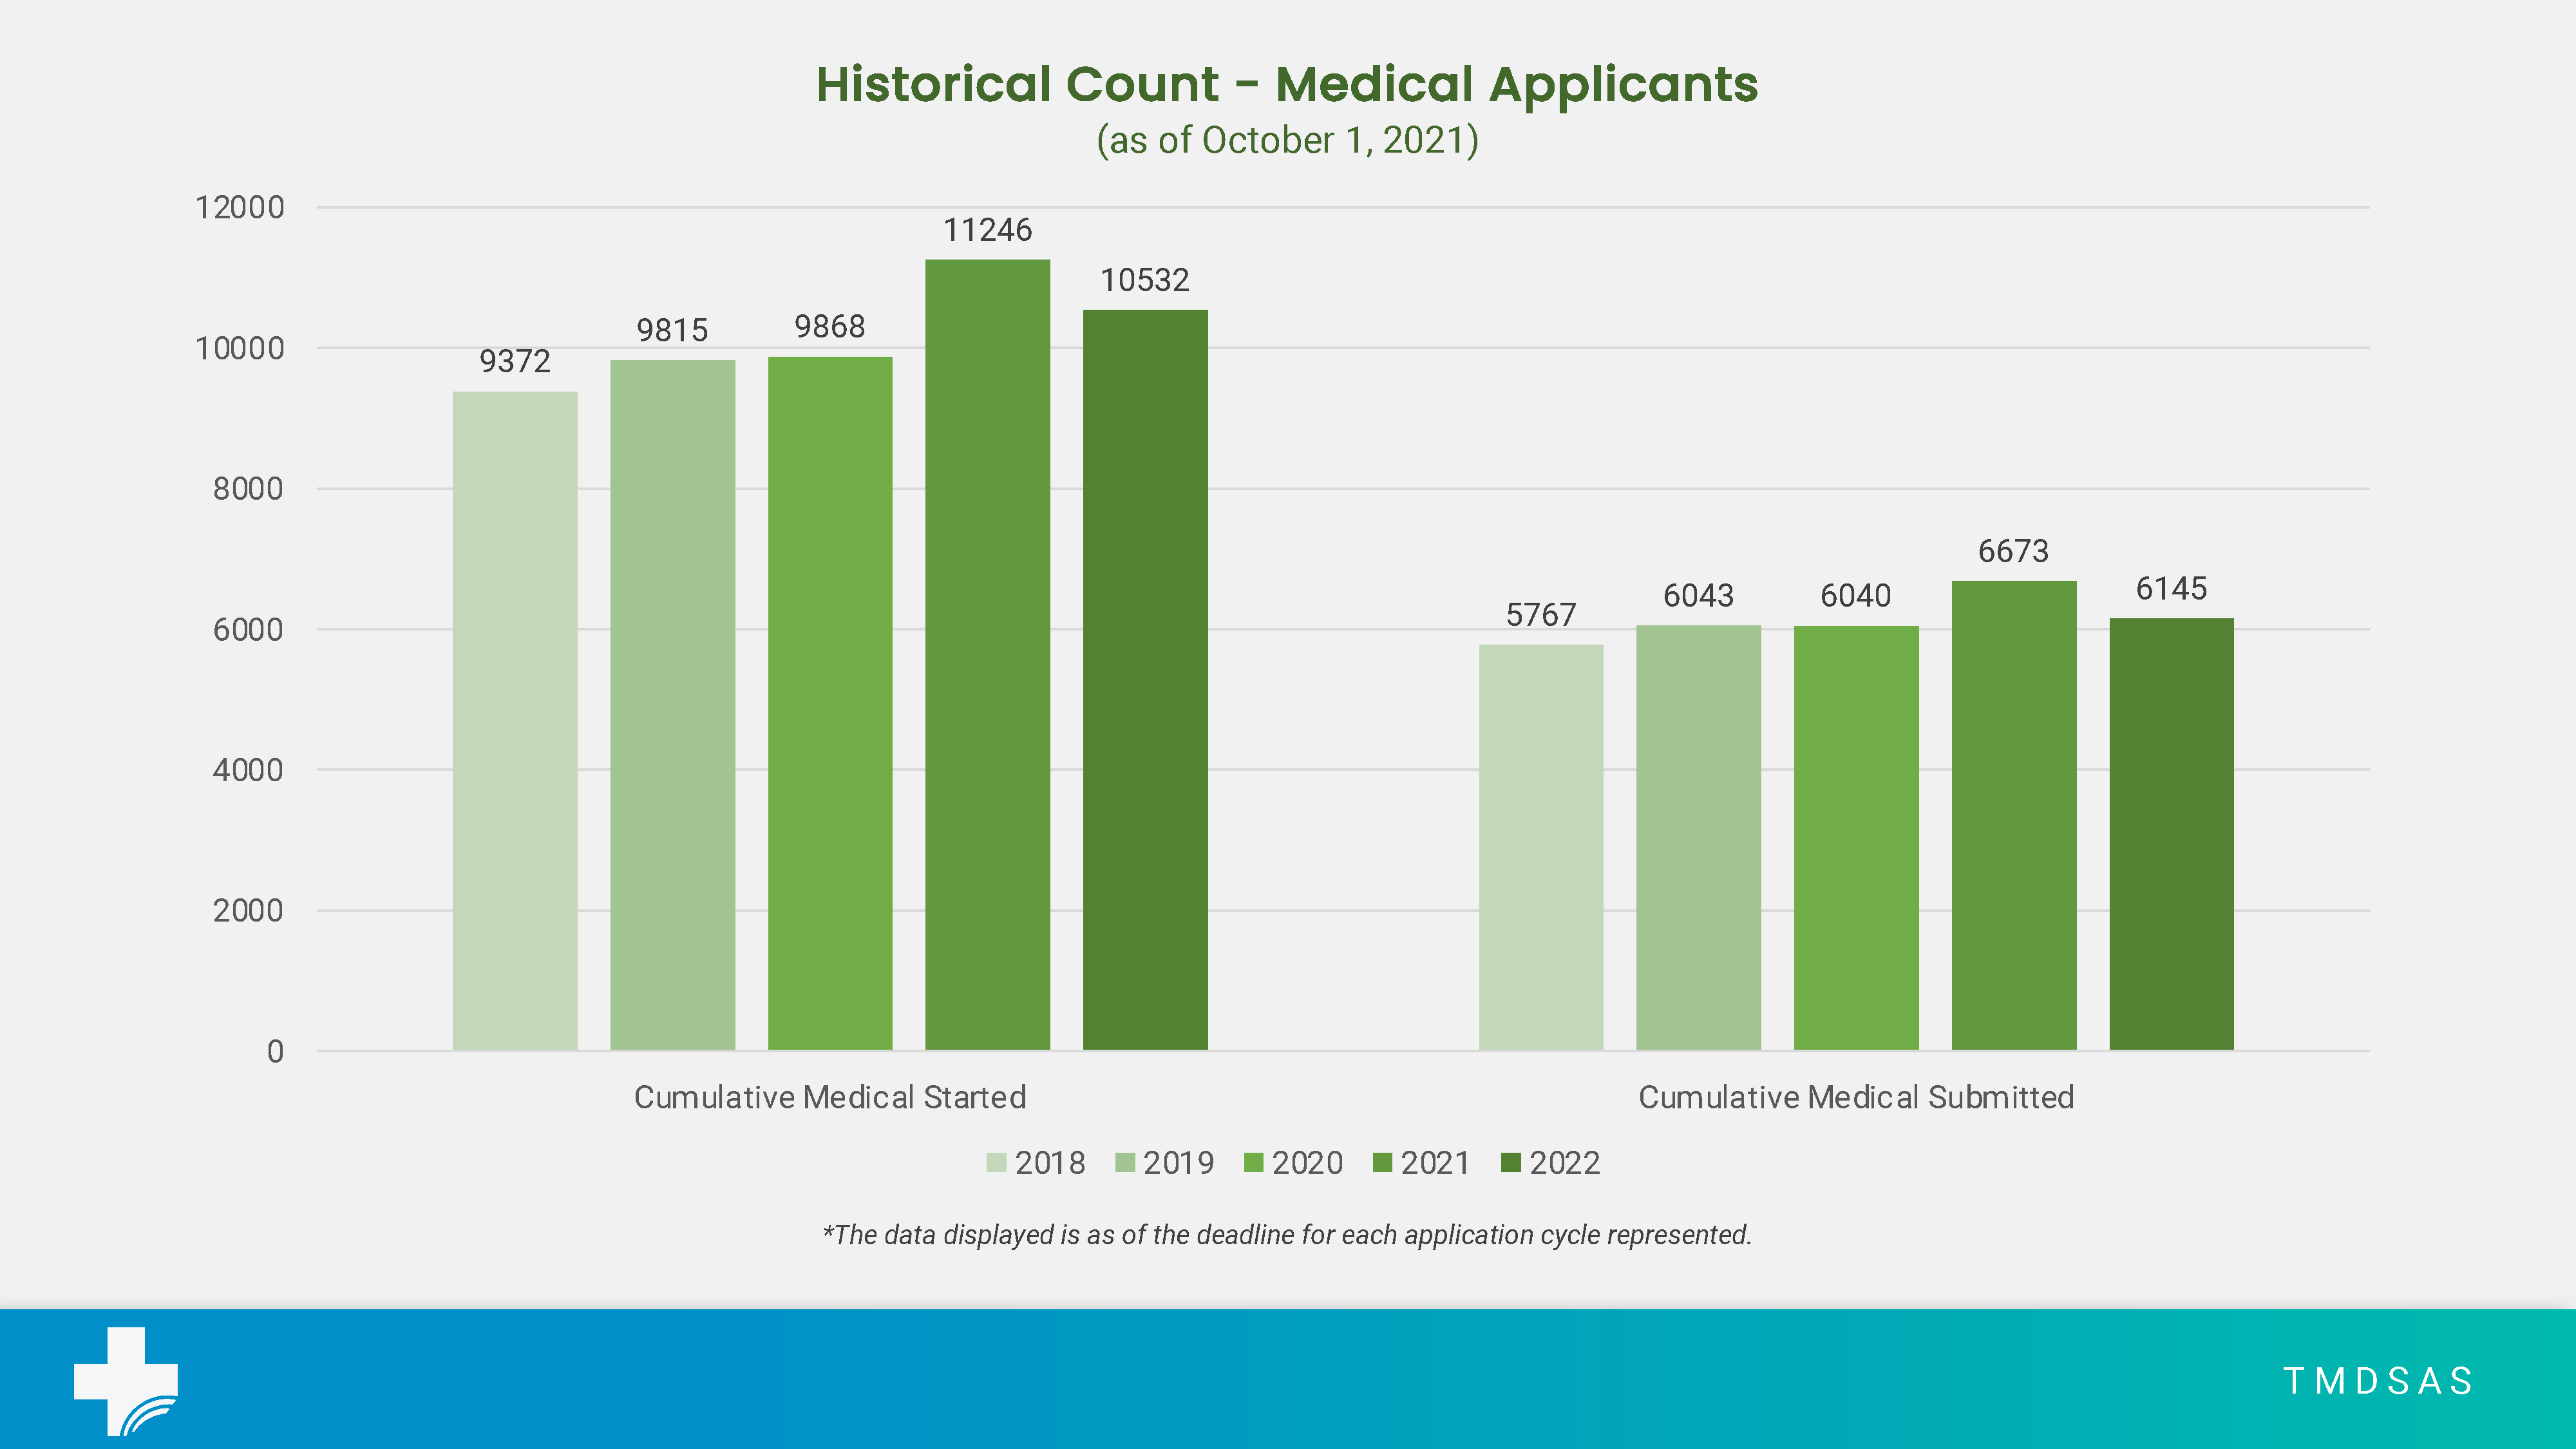 Total Medical Application Numbers for October 2021